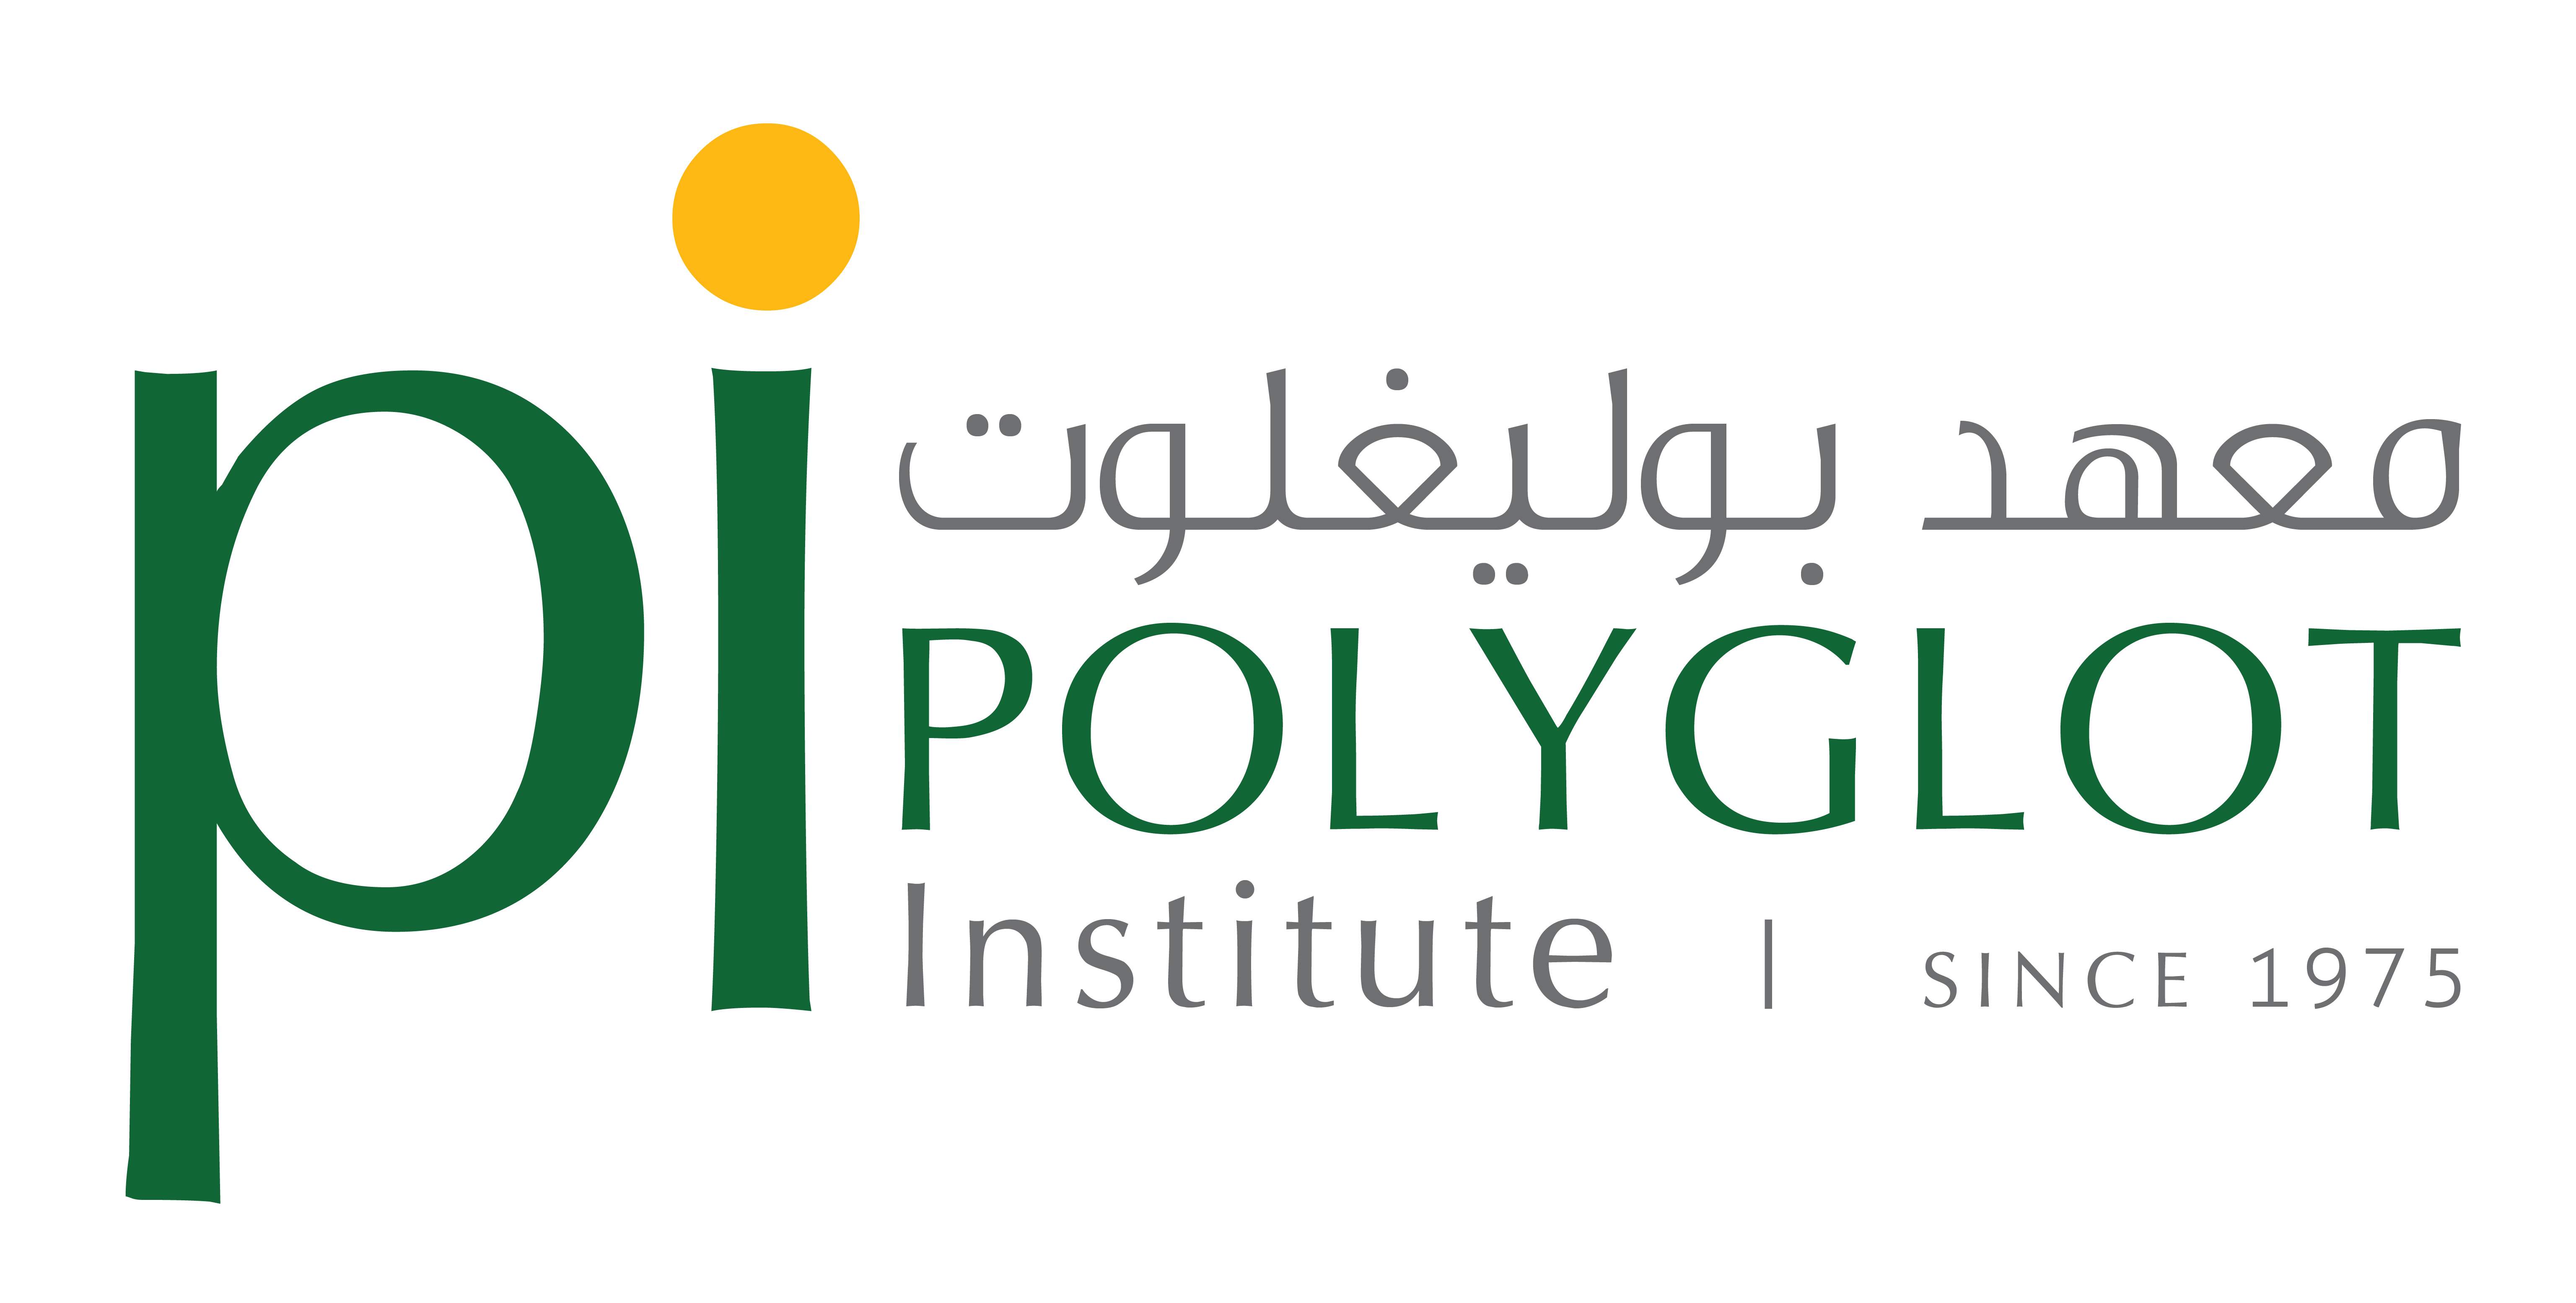 More about Polyglot Institute